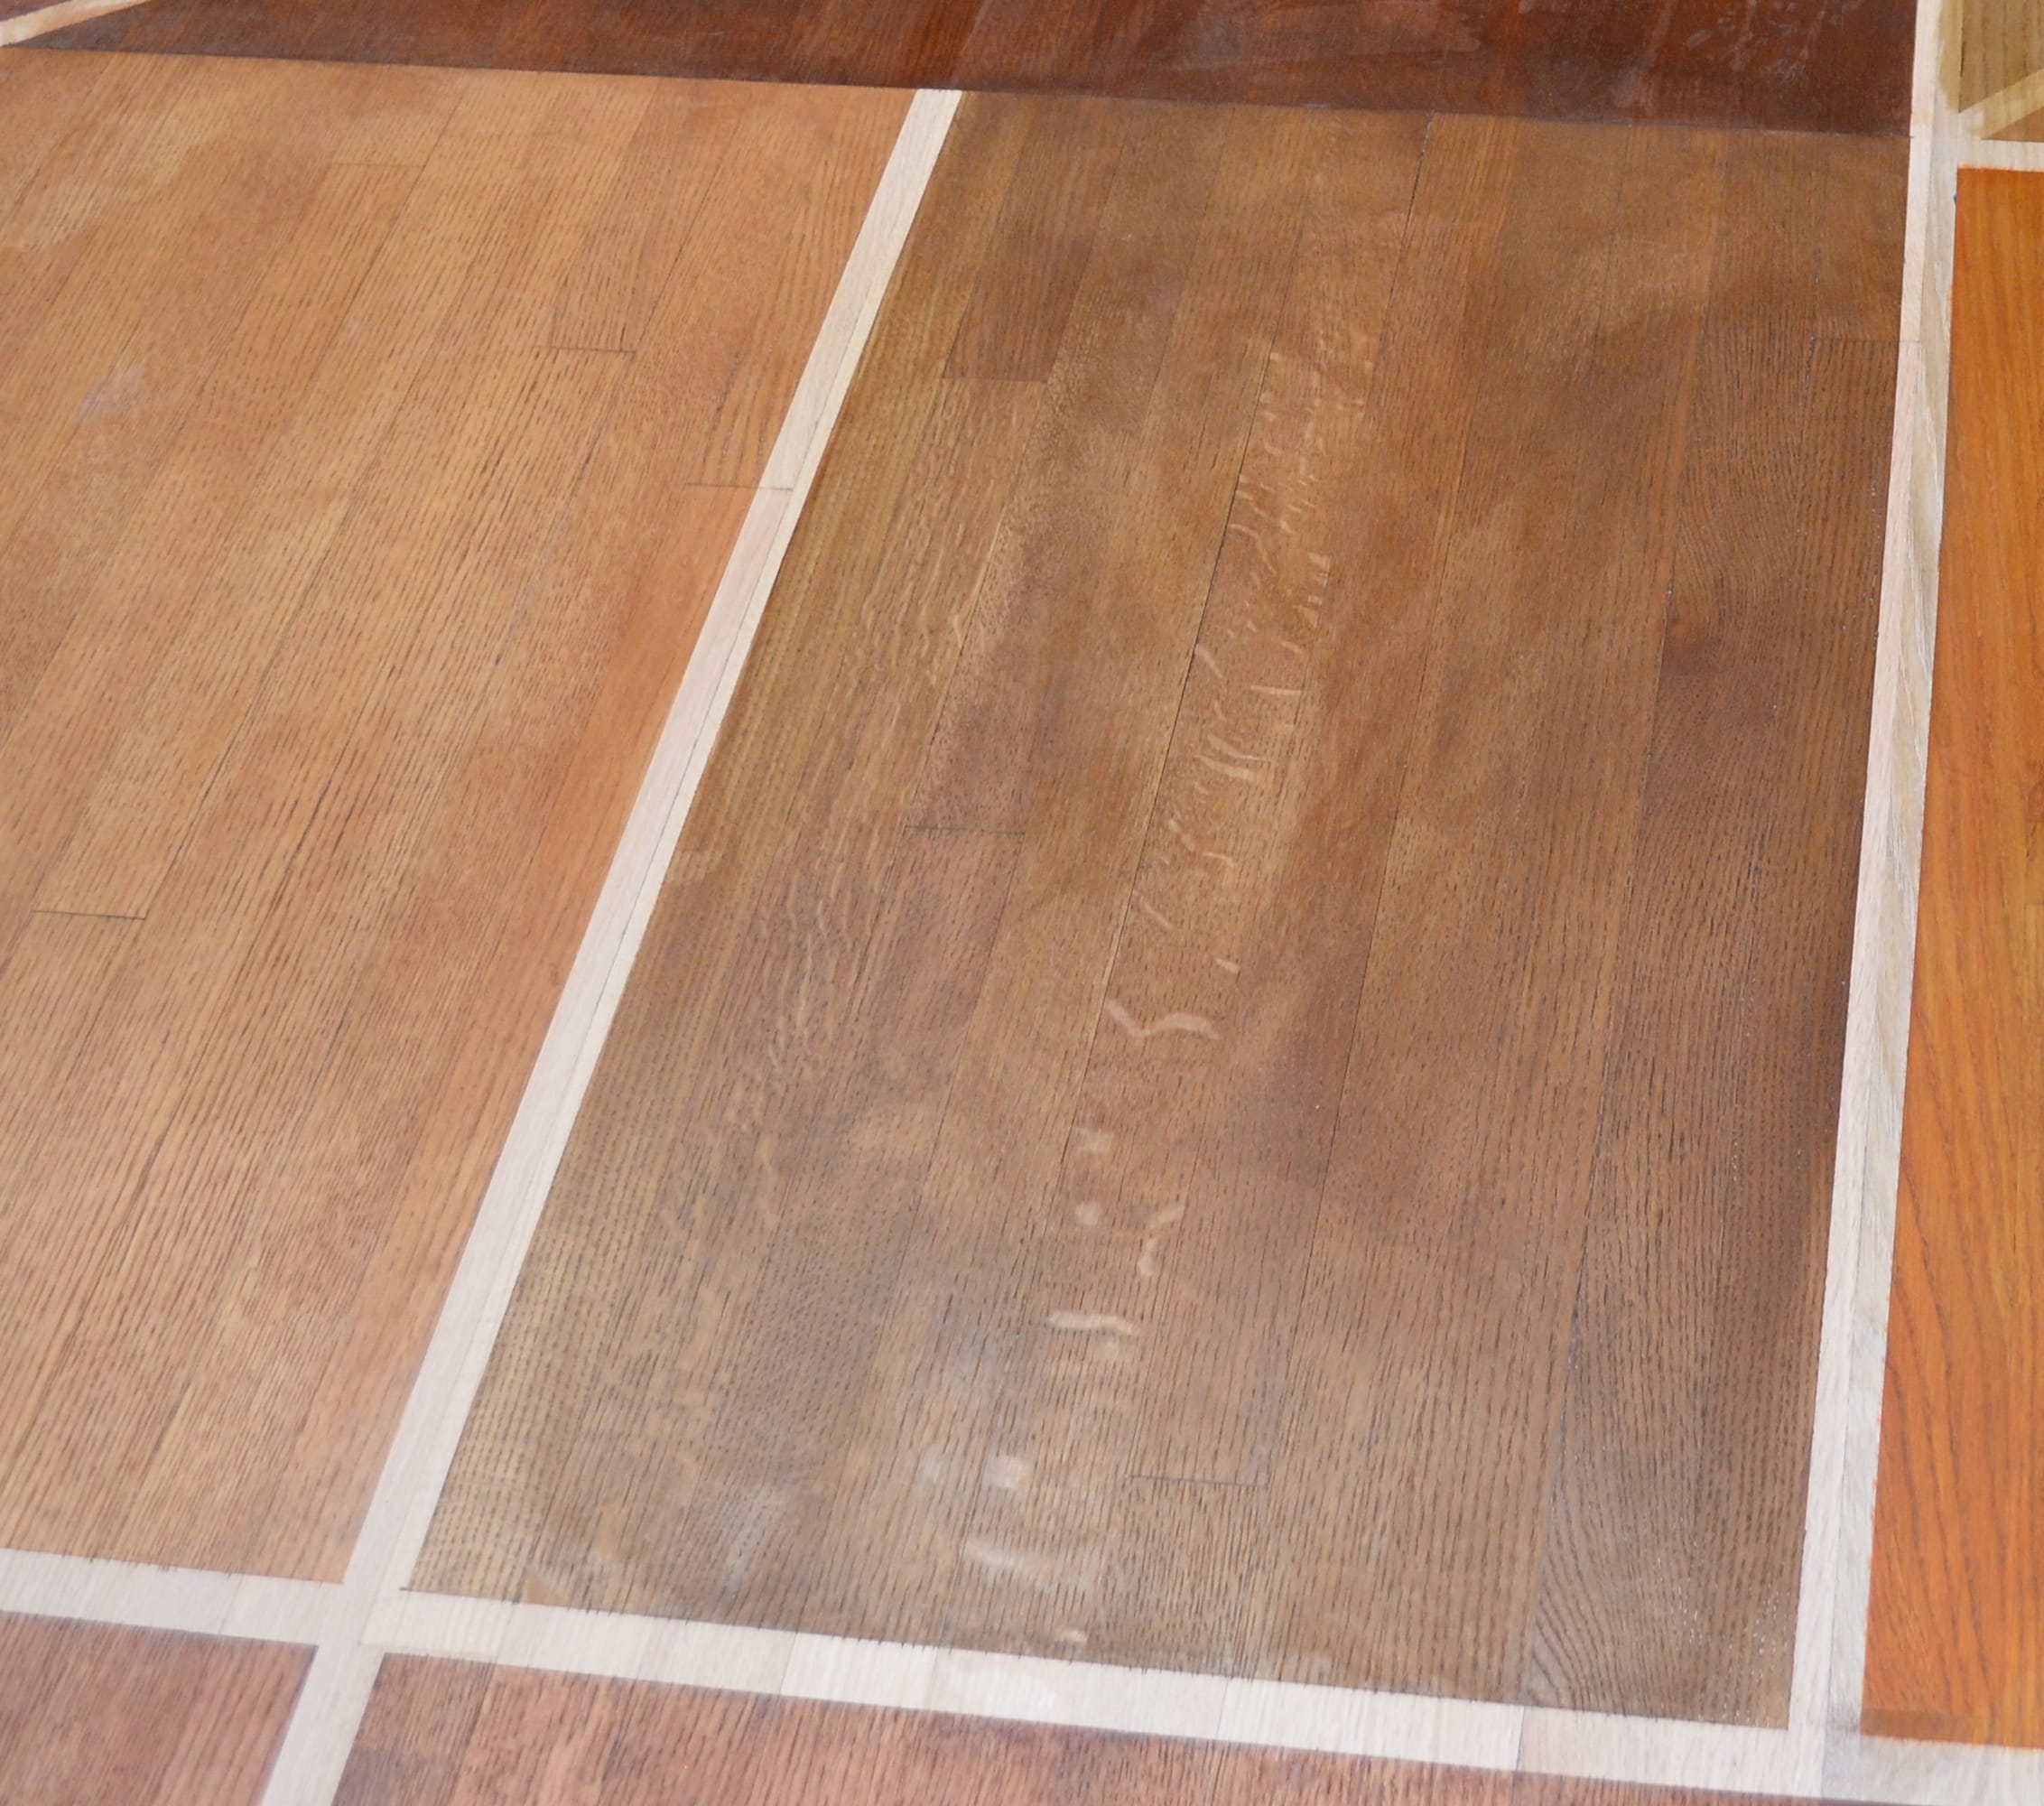 The Wonders And Woes Of Water Based Stain, How To Apply Water Based Stain To Hardwood Floor